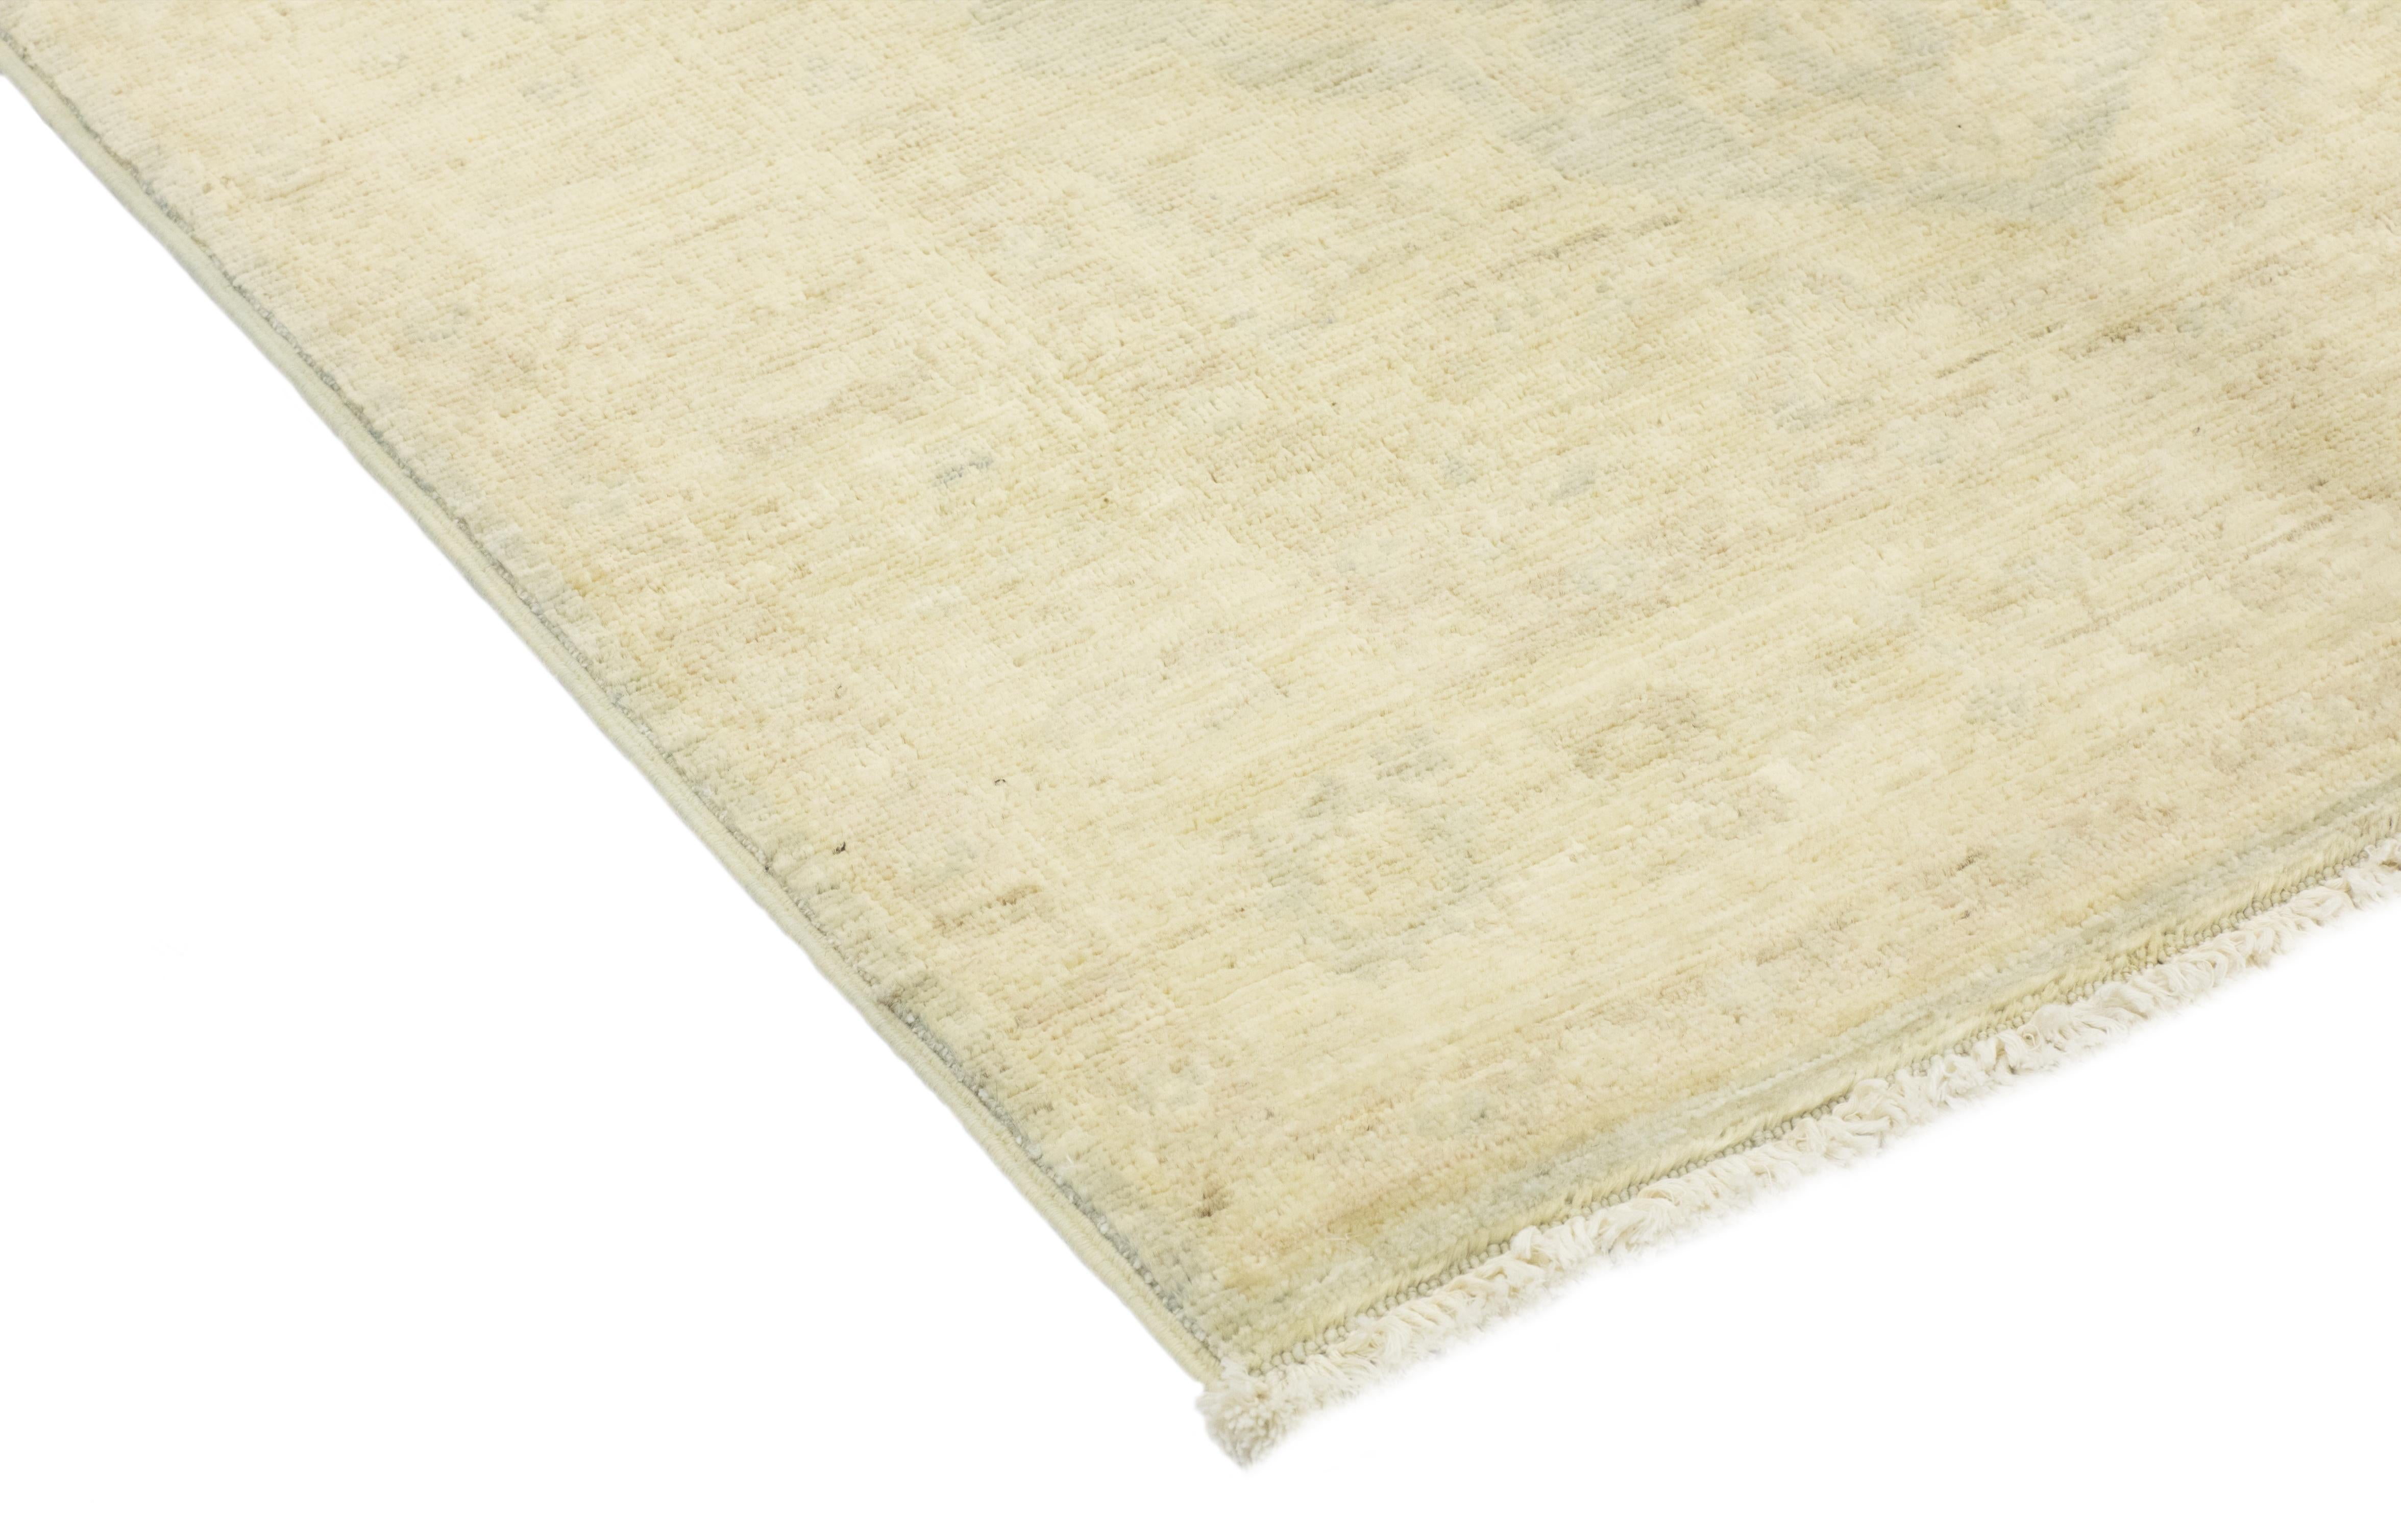 Color: Ivory - Made in: Pakistan. 100% wool. Originating centuries ago in what is now Turkey, Oushak rugs have long been sought after for their intricate patterns, lush yet subtle colors, and soft luster. These rugs continue that tradition. Hand